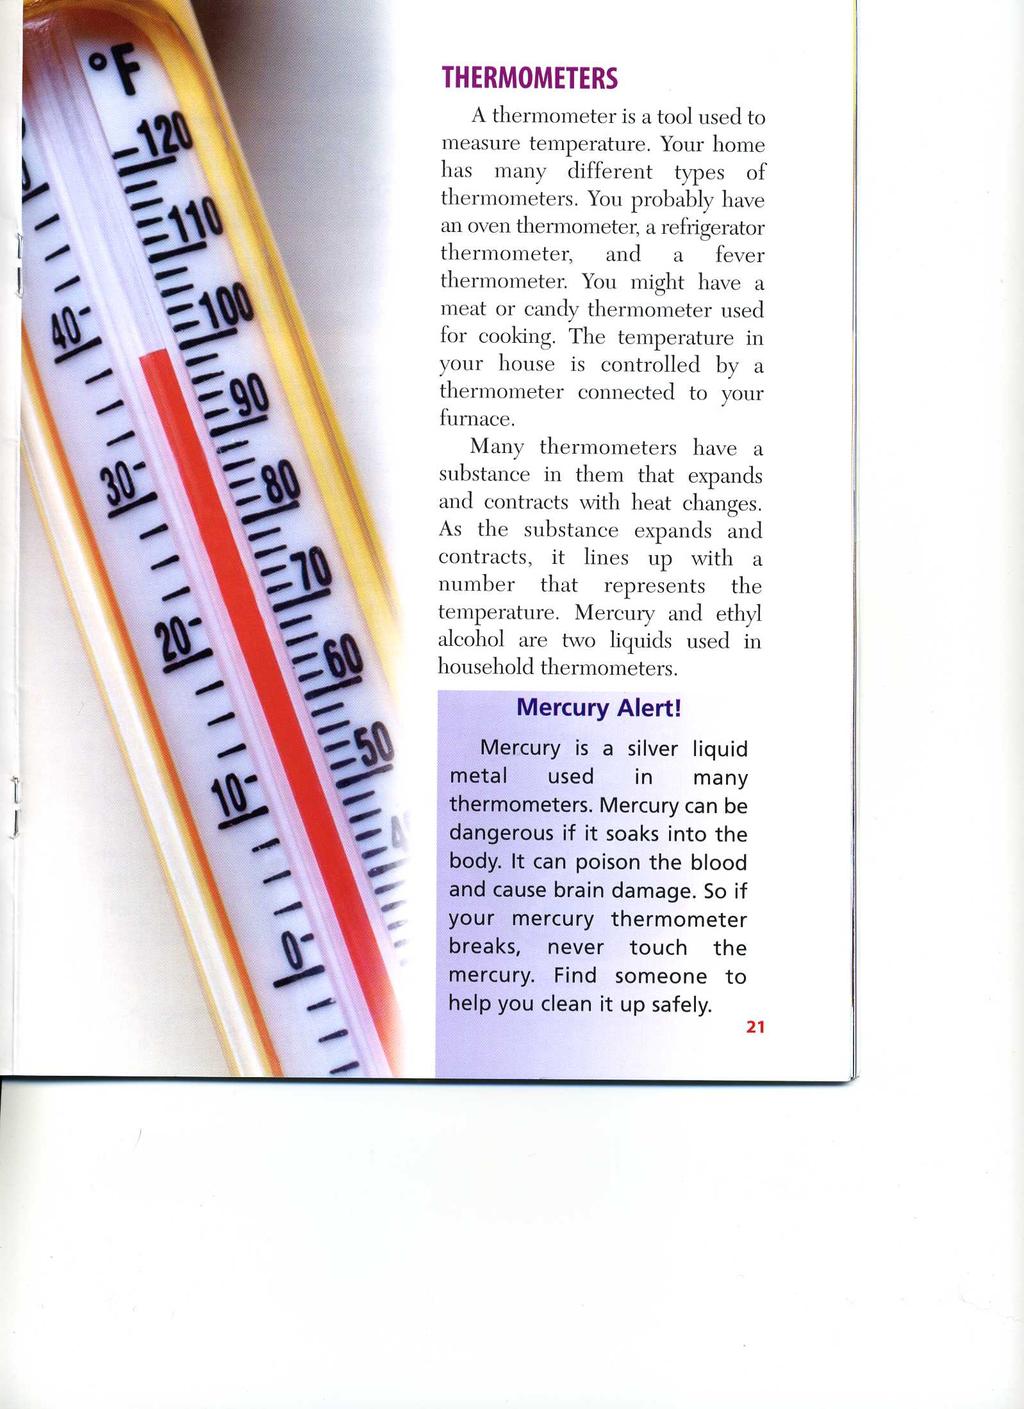 THERMOMETERS A thermometer is a tool used to measure temperature. Your home has many different types of thermometers.